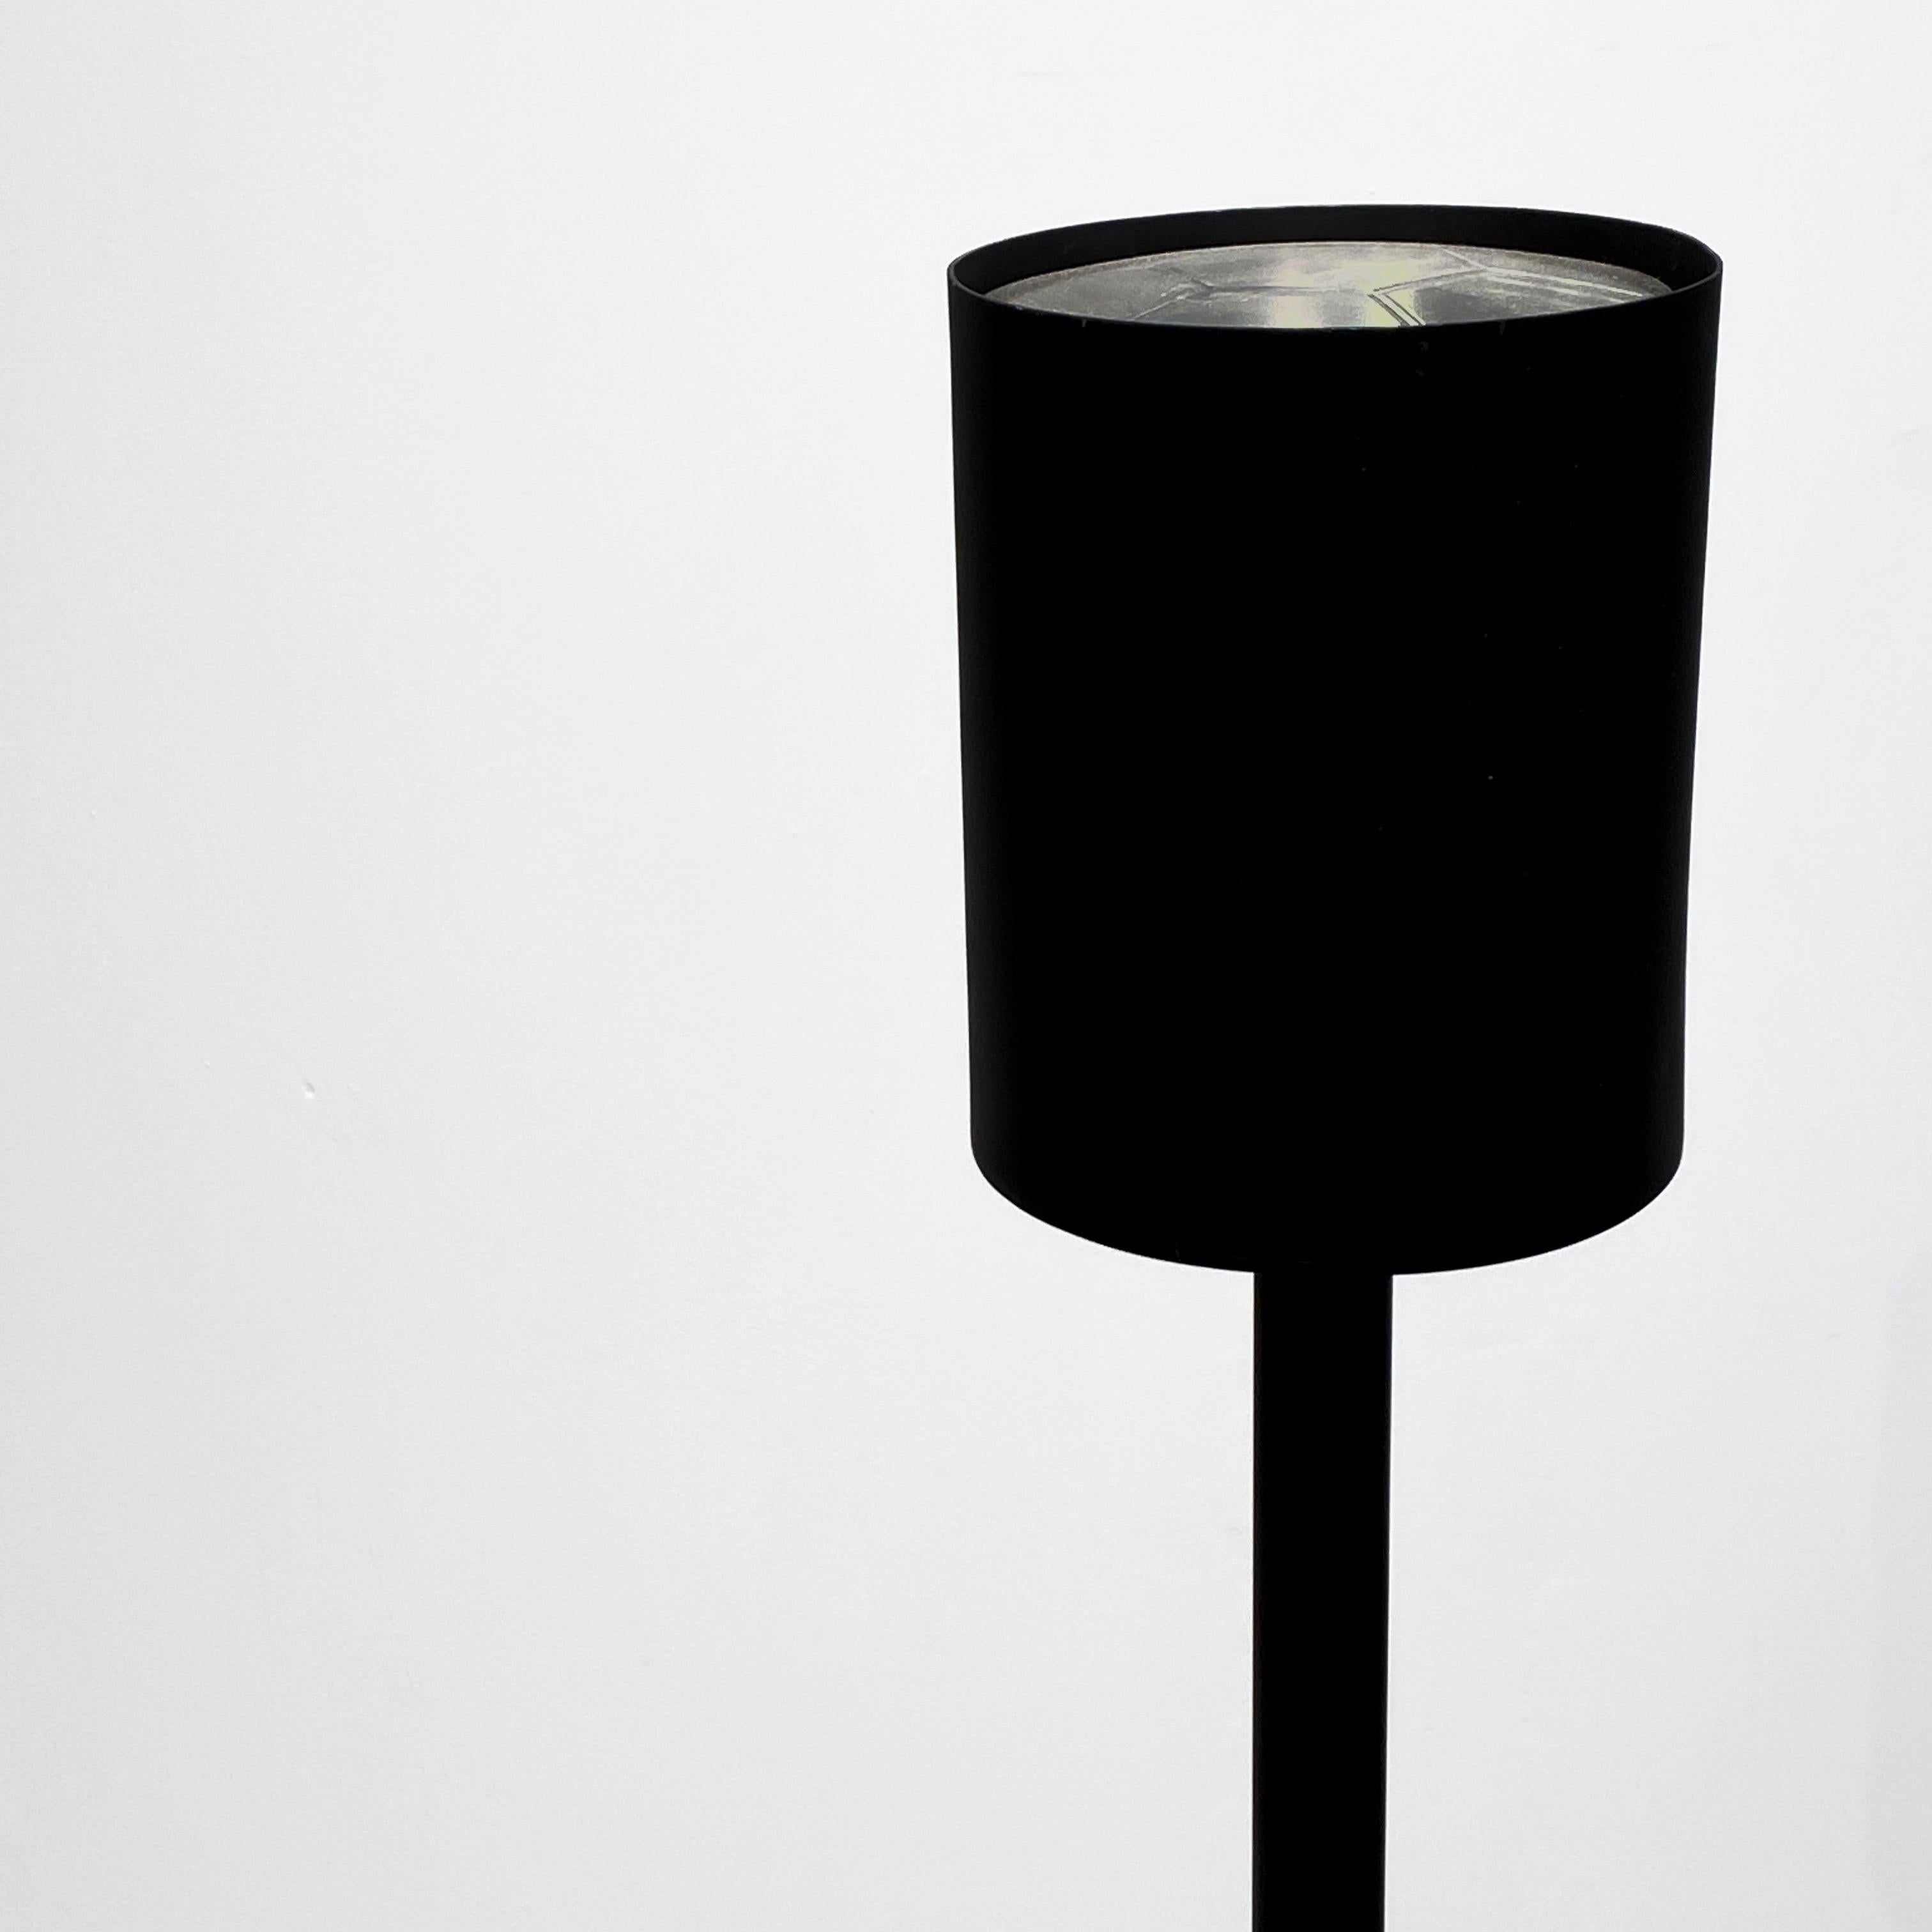 This unique floorlamp is designed in 1958 by architect/designer Wim Den Boon for private Dutch client from Wassenaar. The lamp is a one of a kind as it is especially designed for this particular client.  Together with the client’s wife, a ceramist,